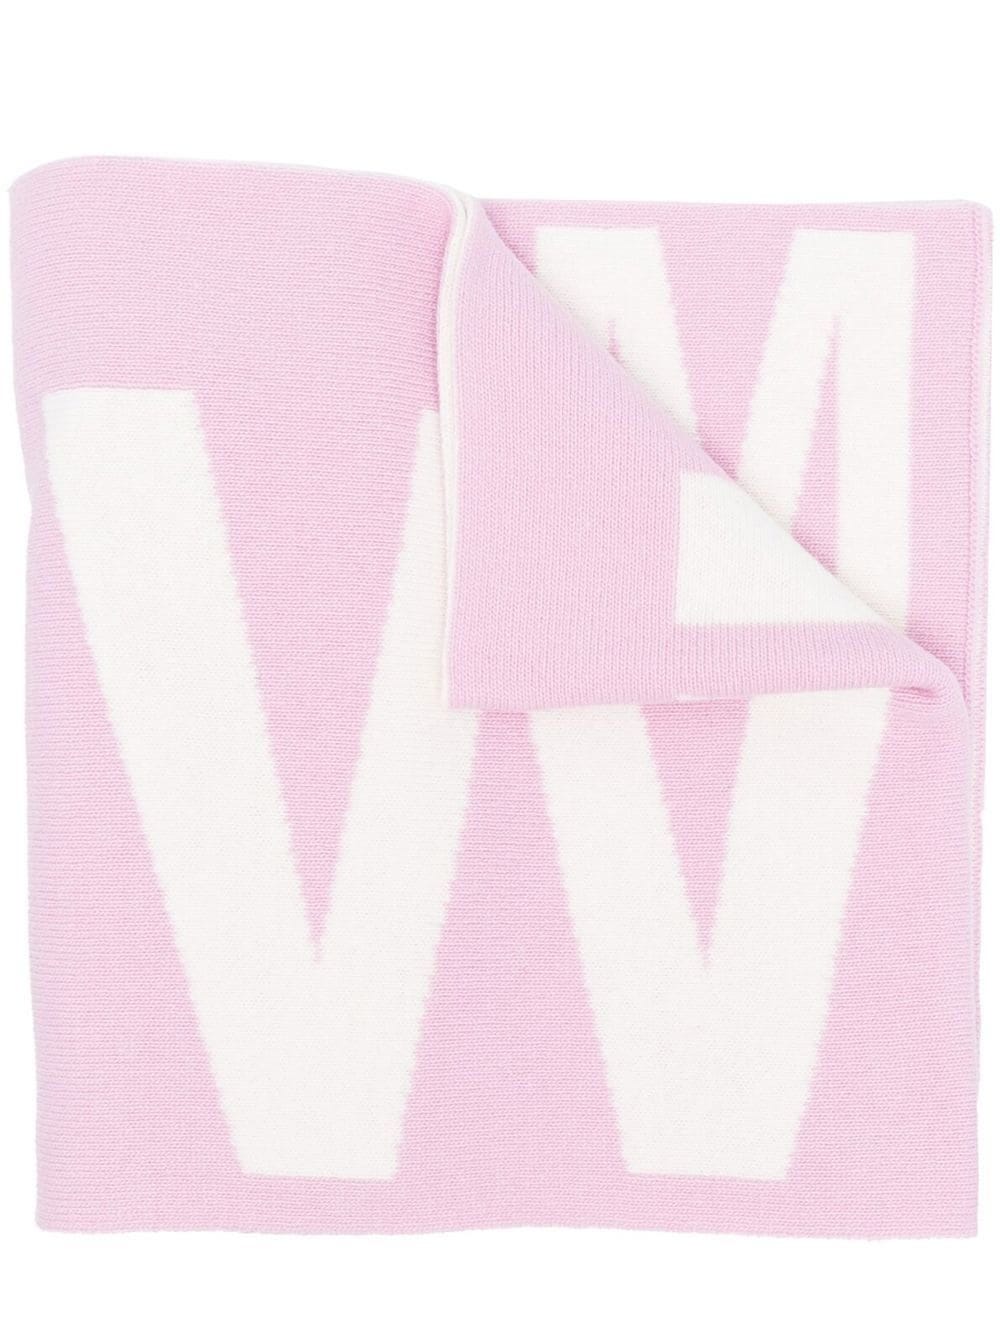 OFF-WHITE PINK SCARF WITH OFF-WHITE LOGO